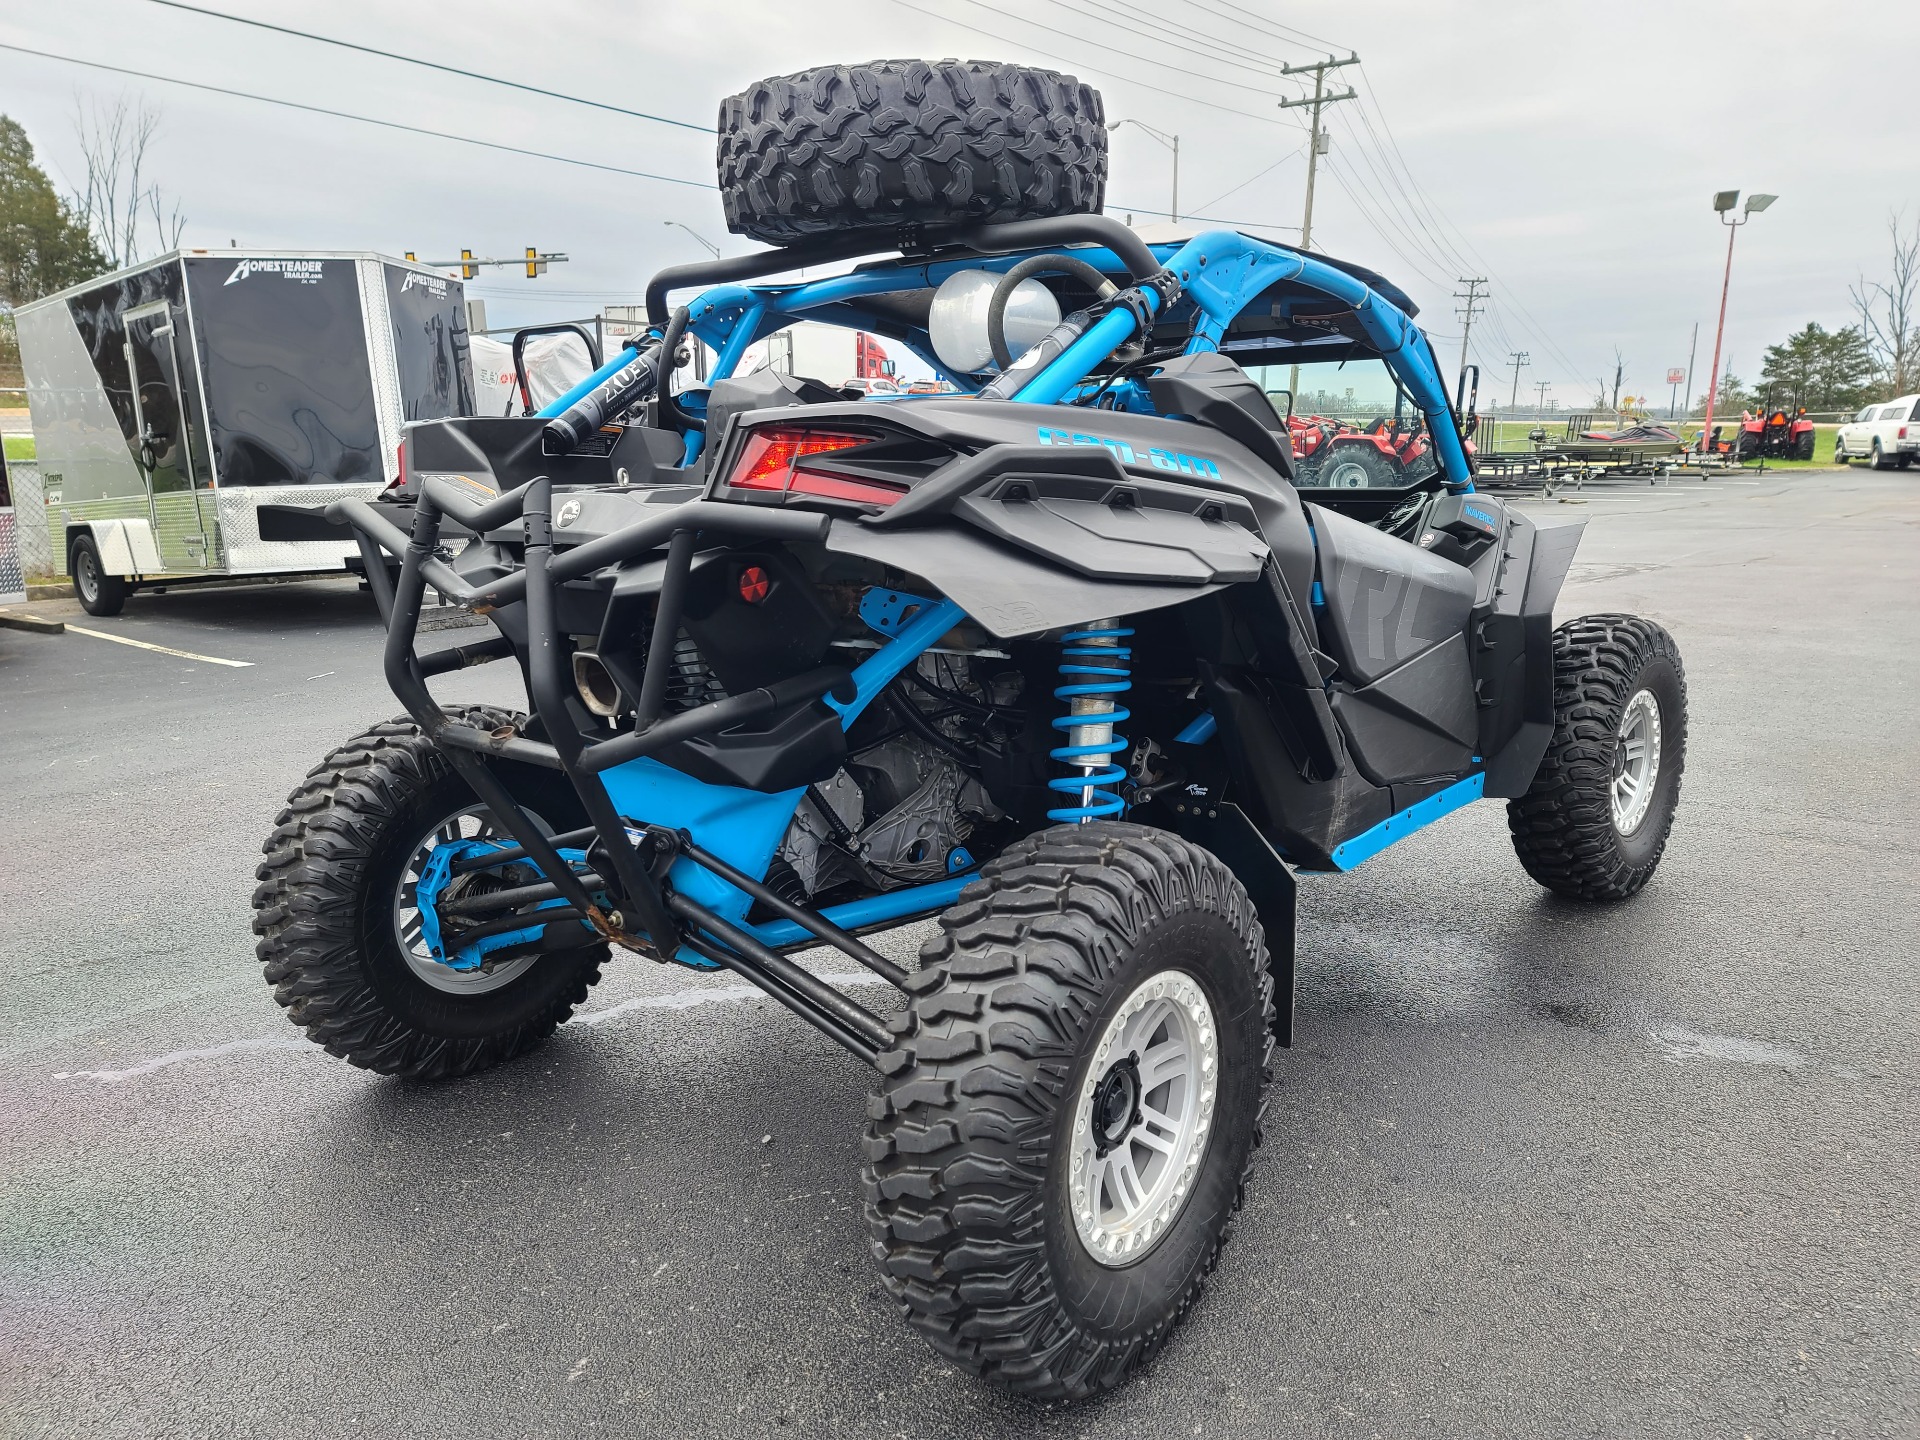 2019 Can-Am Maverick X3 X rc Turbo R in Clinton, Tennessee - Photo 8